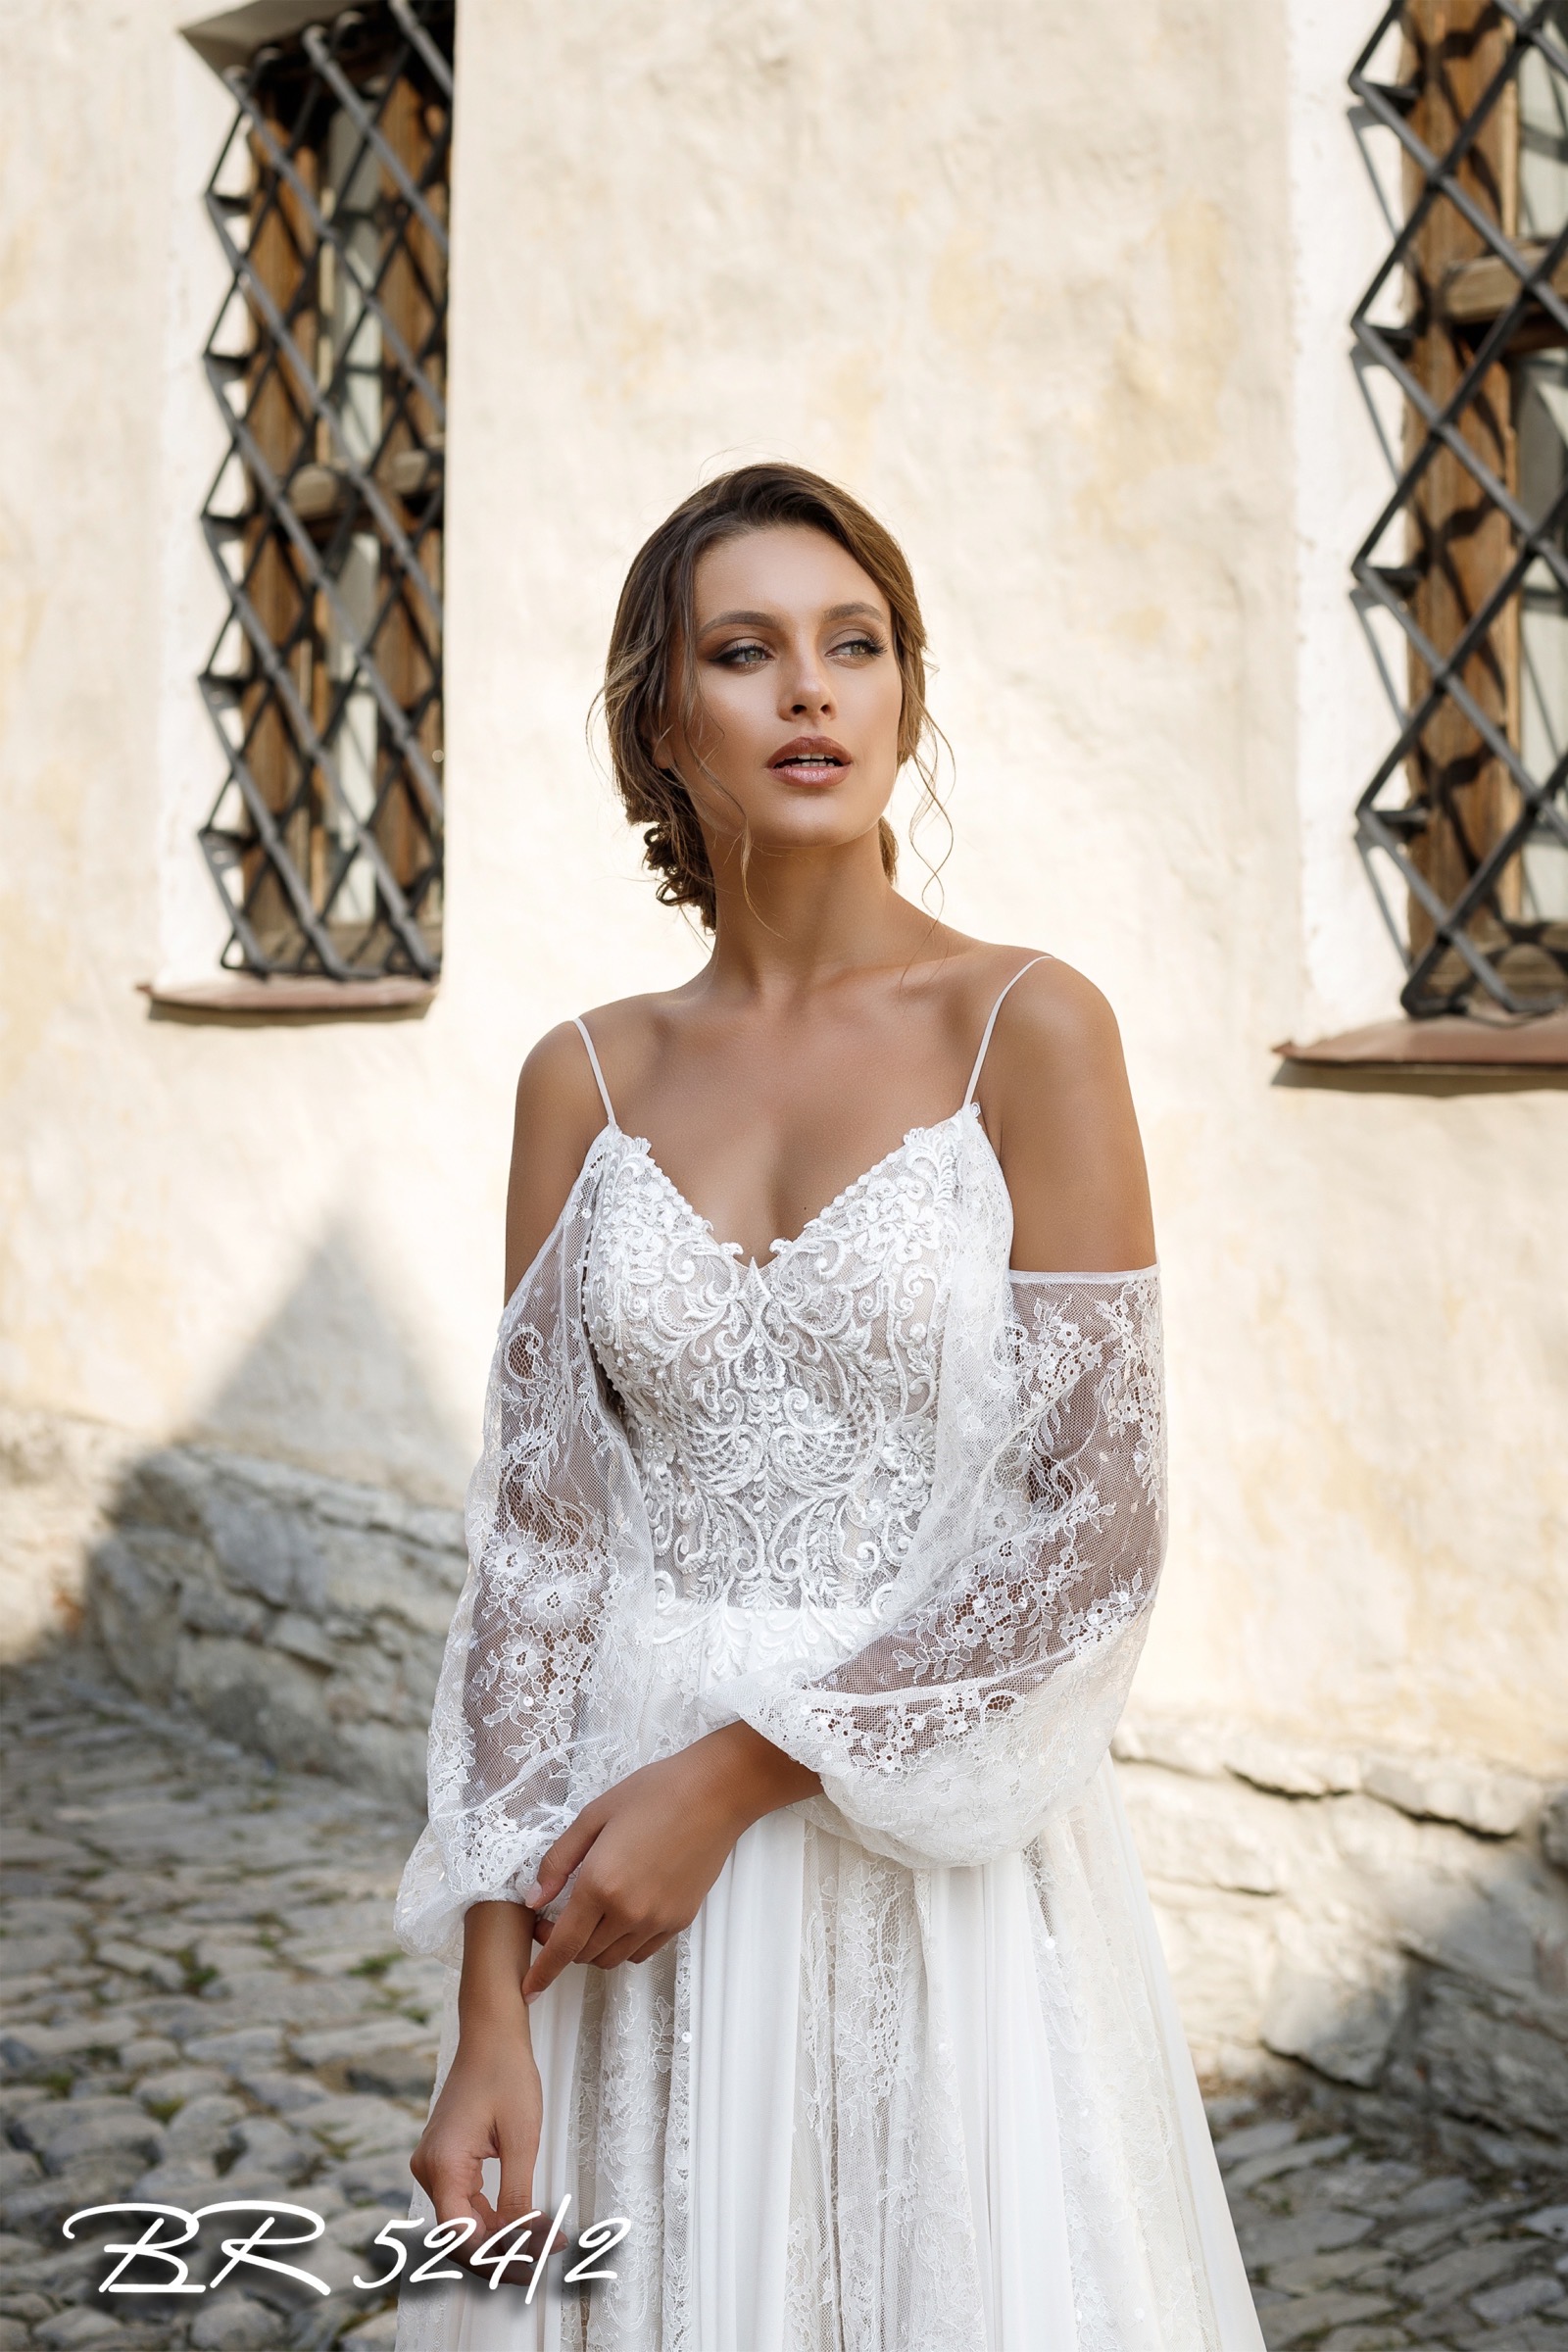 2020 wedding dress A-line v neckline butterfly dropped long sleeves spaghetti straps shimmer sequins embroidery lace